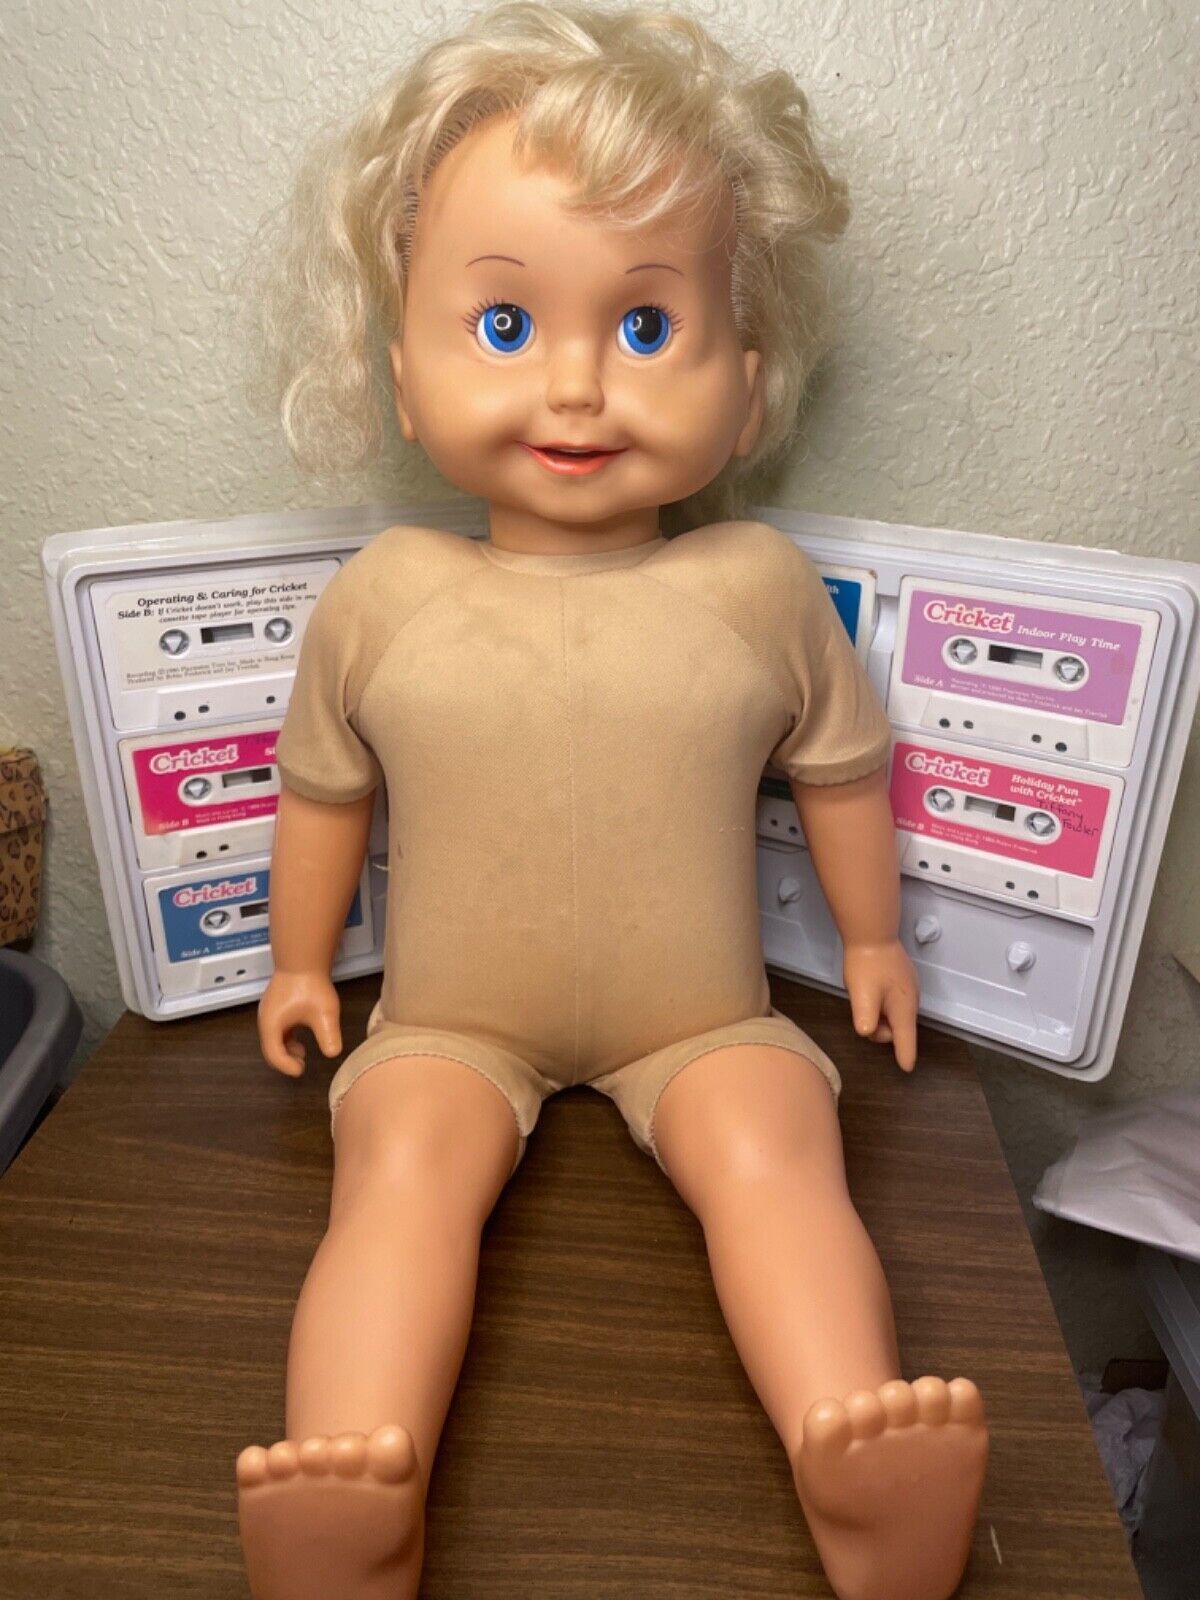 Primary image for Vintage 1986 Playmates CRICKET Talking Doll w/8 Cassettes & Clothes